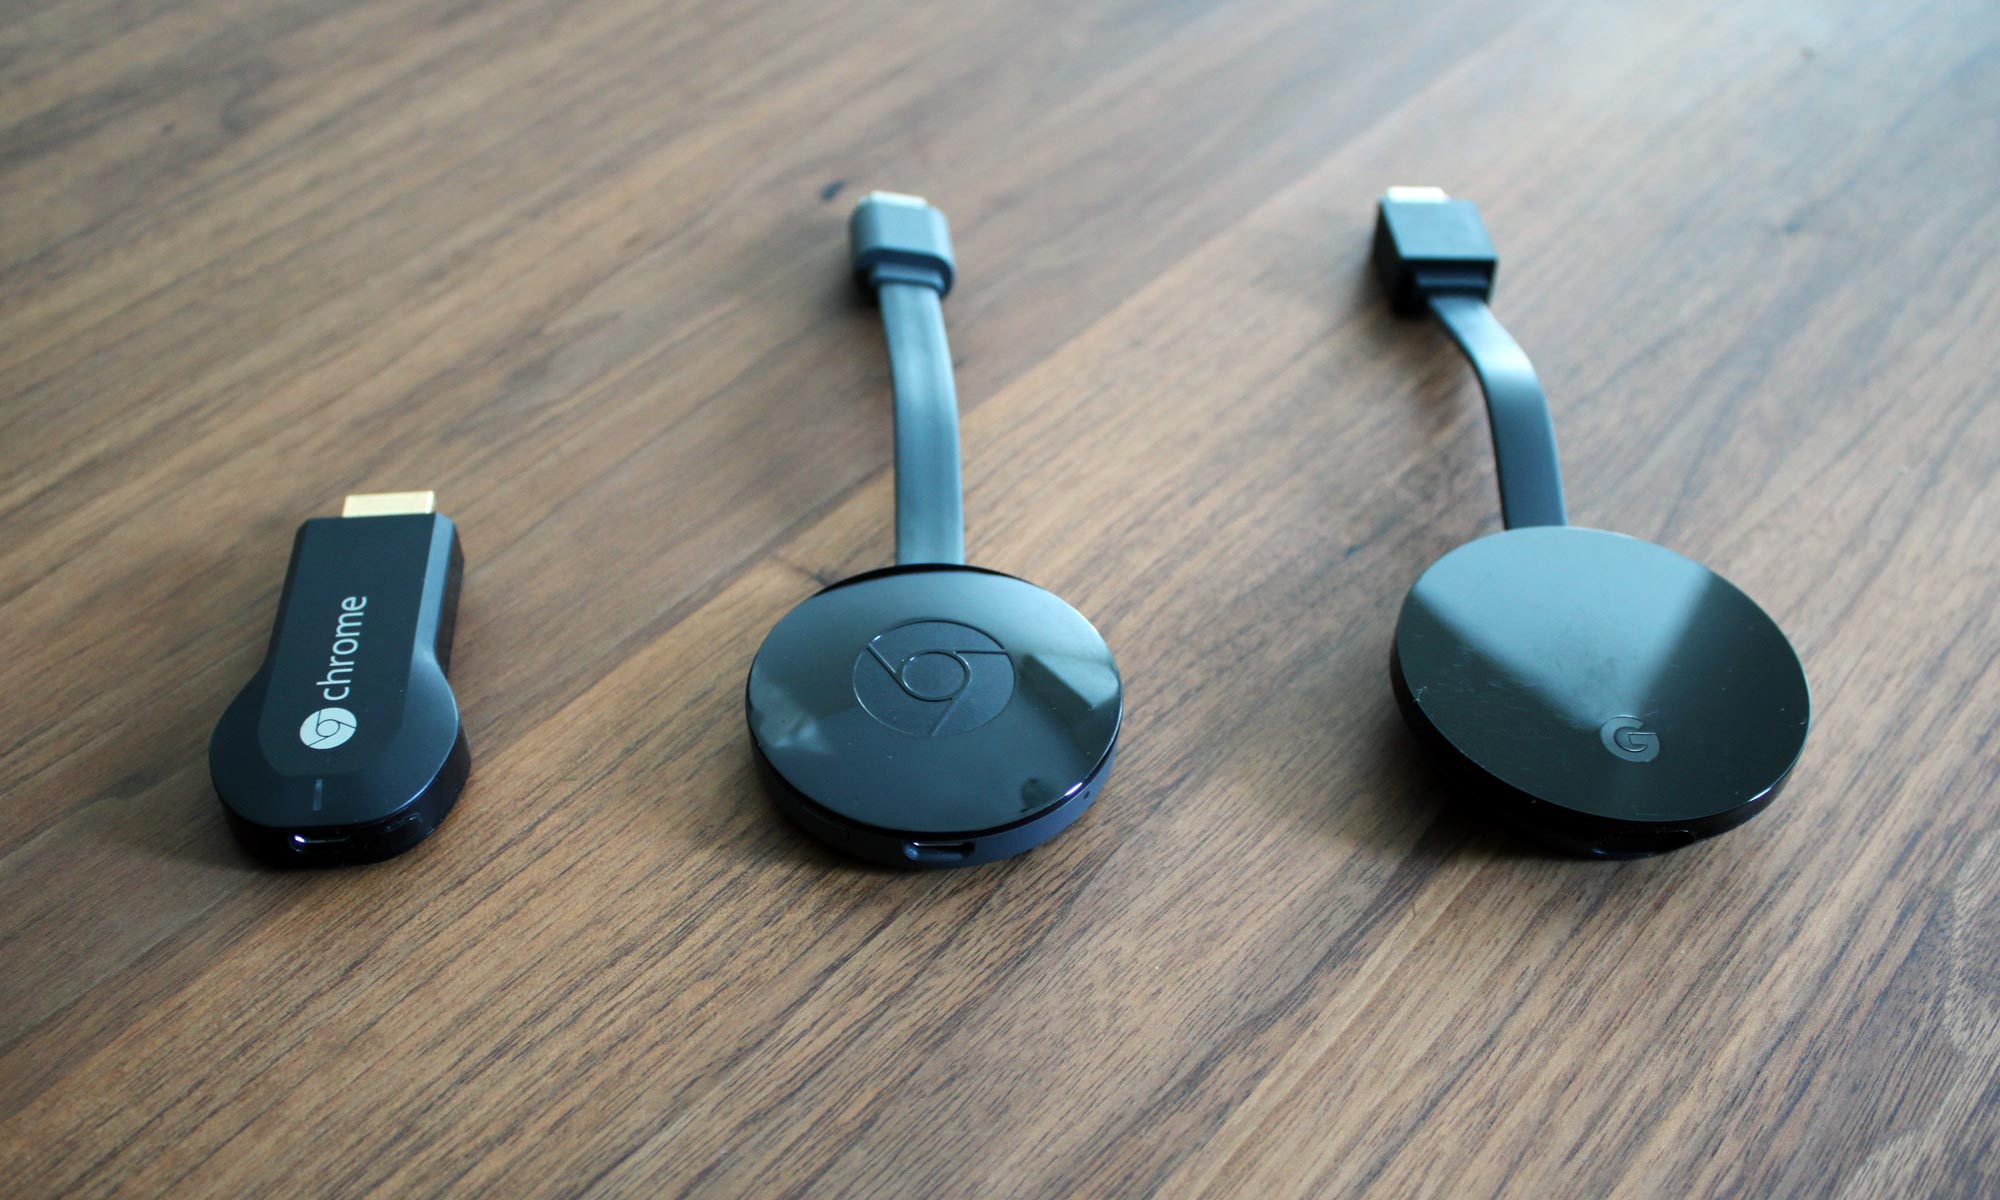 Google confirms that support for the Chromecast ended -